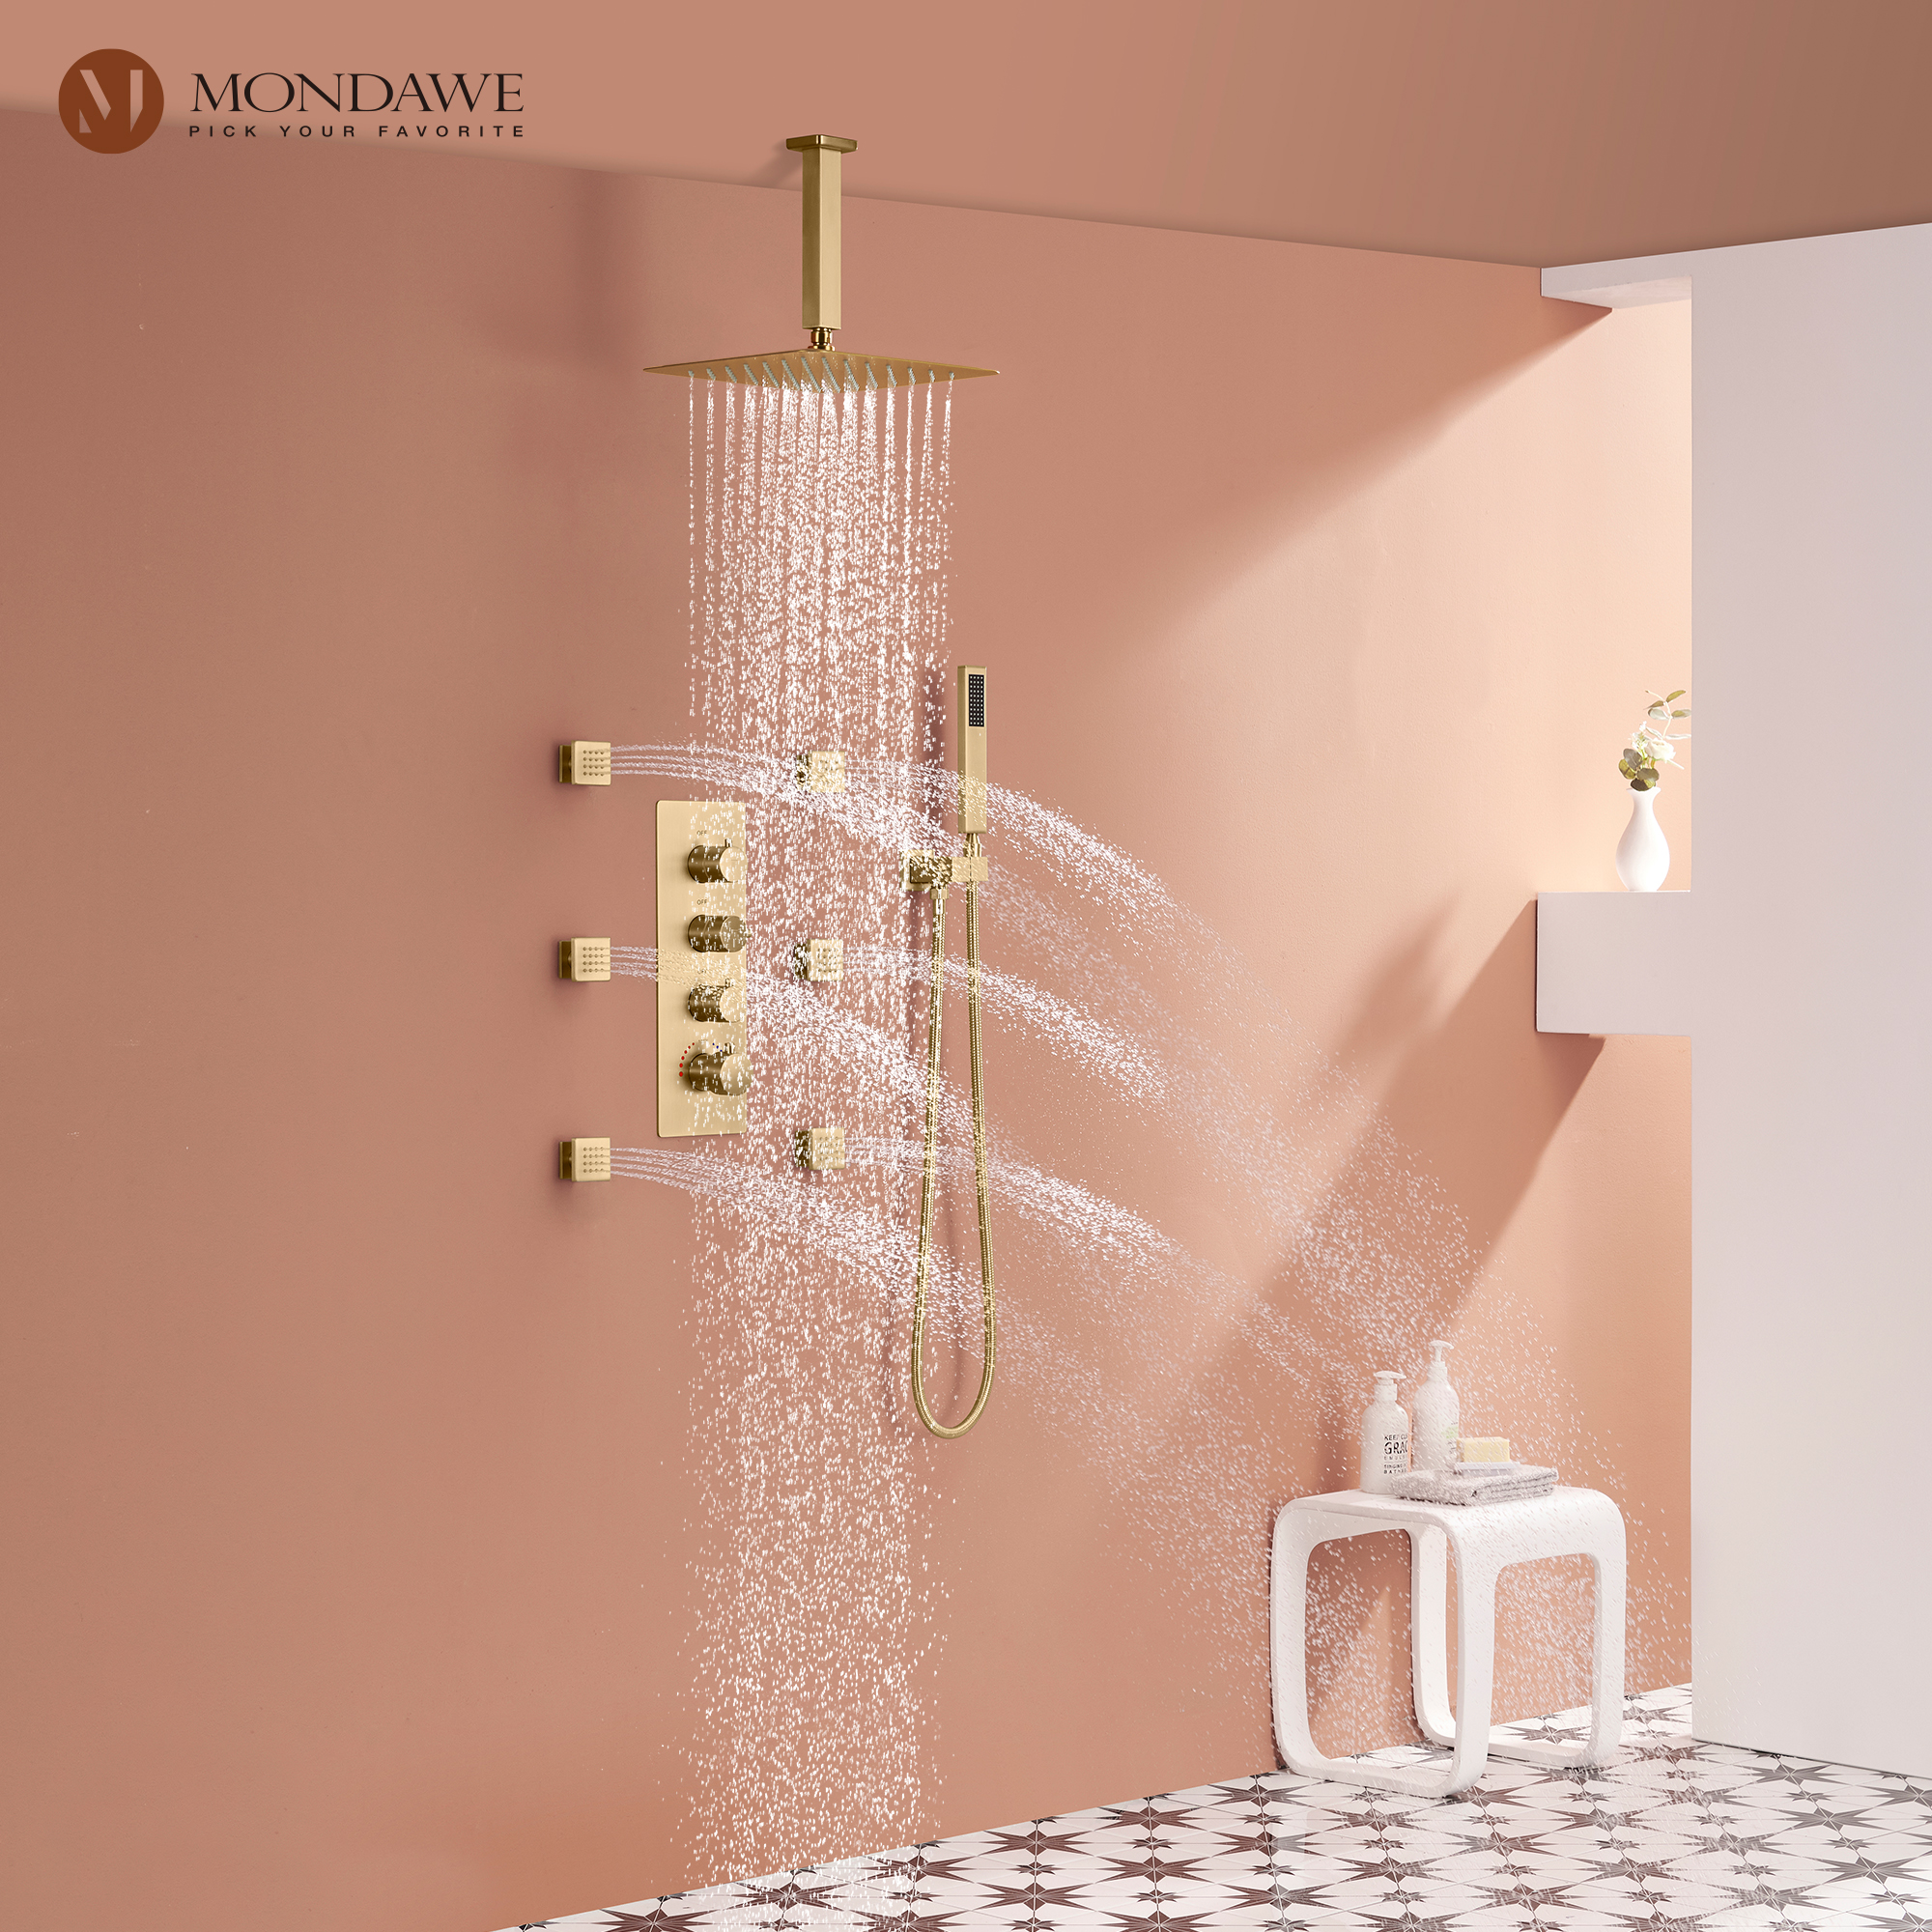 Mondawe Ceiling Mount Thermostatic Rainfall Shower System Set with Hand Held Shower Head and 6 Body Jets-Mondawe